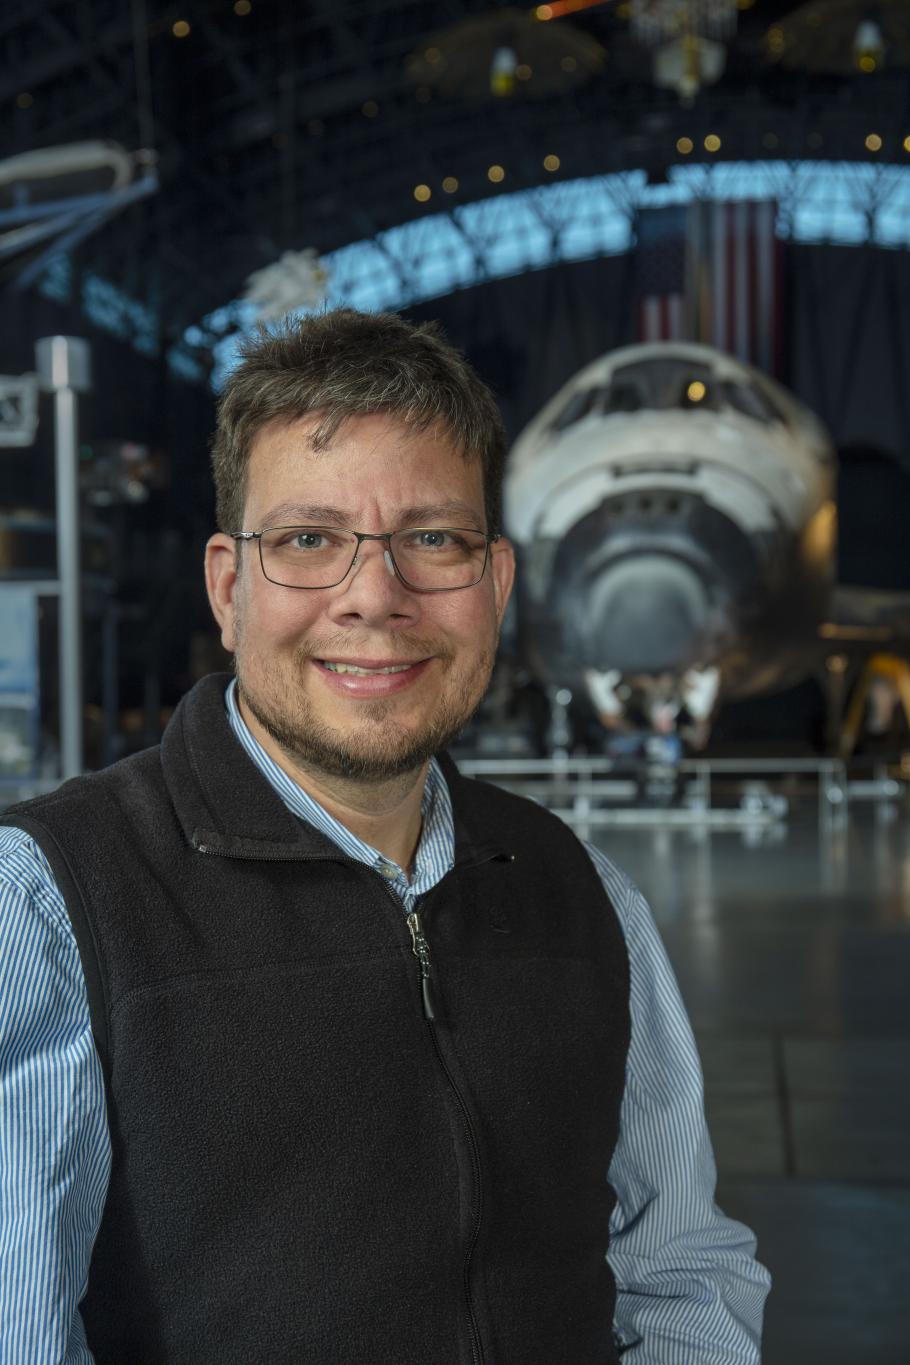 Francisco Torres in front of the space shuttle Discovery